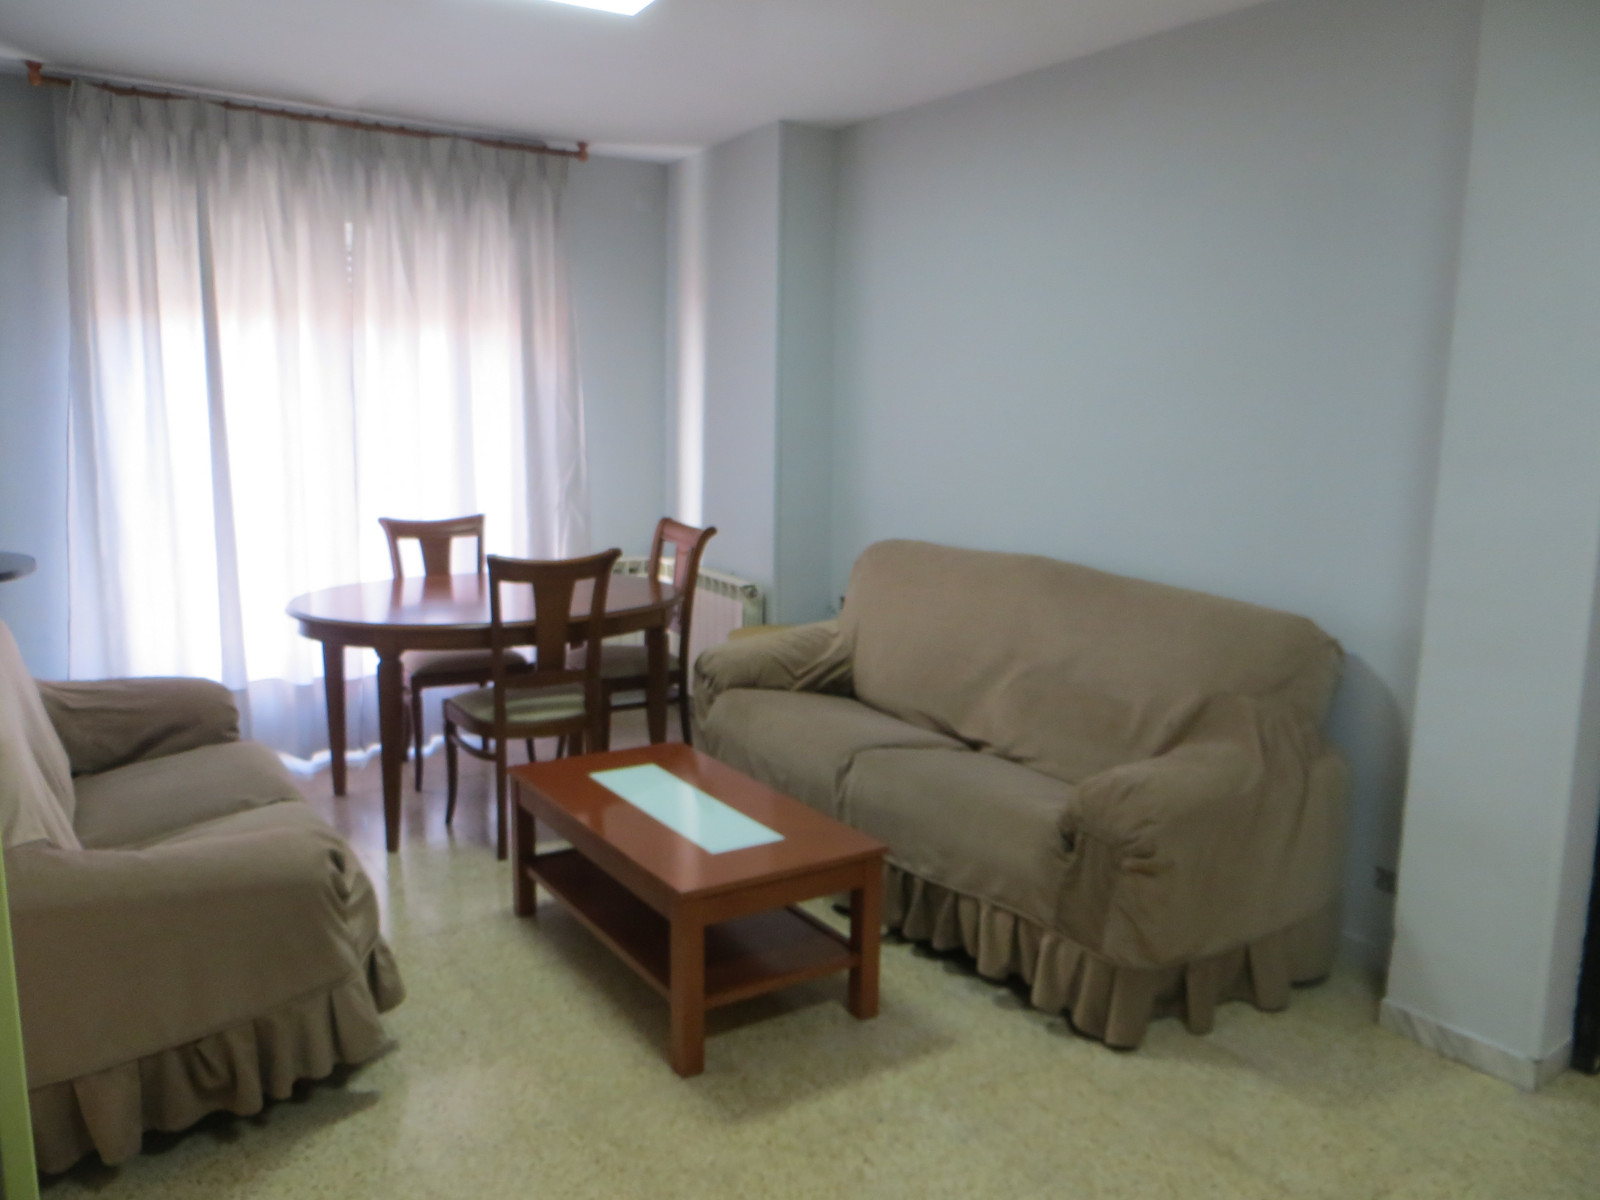 Flat for rent in Pajarillos, Valladolid